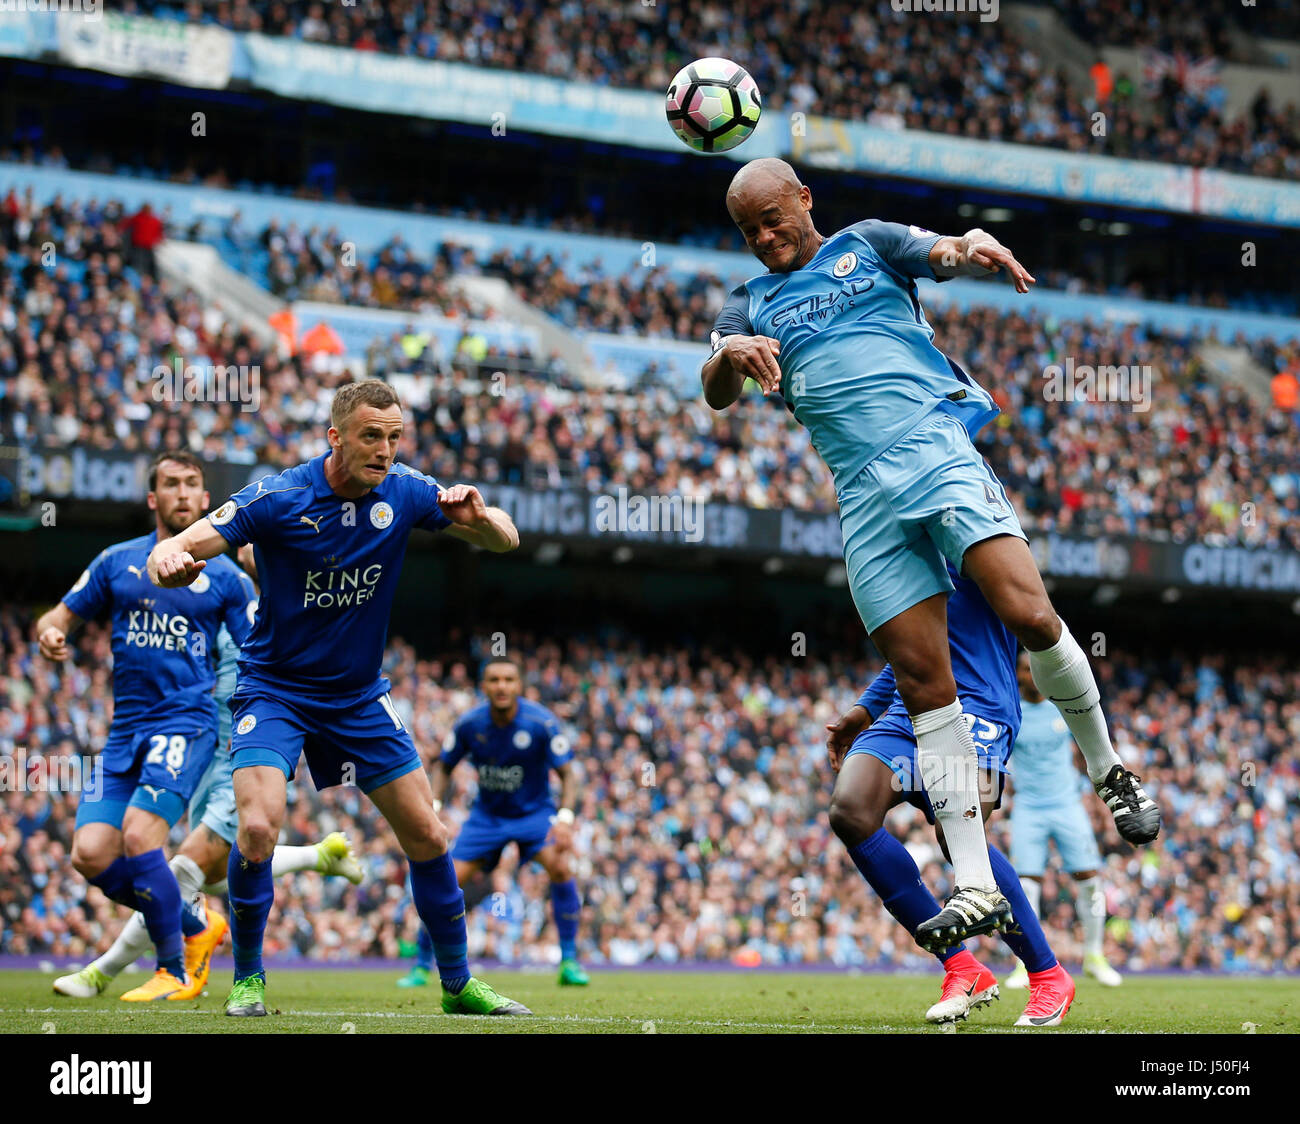 Manchester, UK. 13th May, 2017. Vincent Kompany of Manchester City climbs to try and connect with a header as Andy King of Leicester City waits to clear during the English Premier League match at the Etihad Stadium, Manchester. Picture date: May 13th 2017. Pic credit should read: Simon Bellis/Sportimage/CSM/Alamy Live News Stock Photo